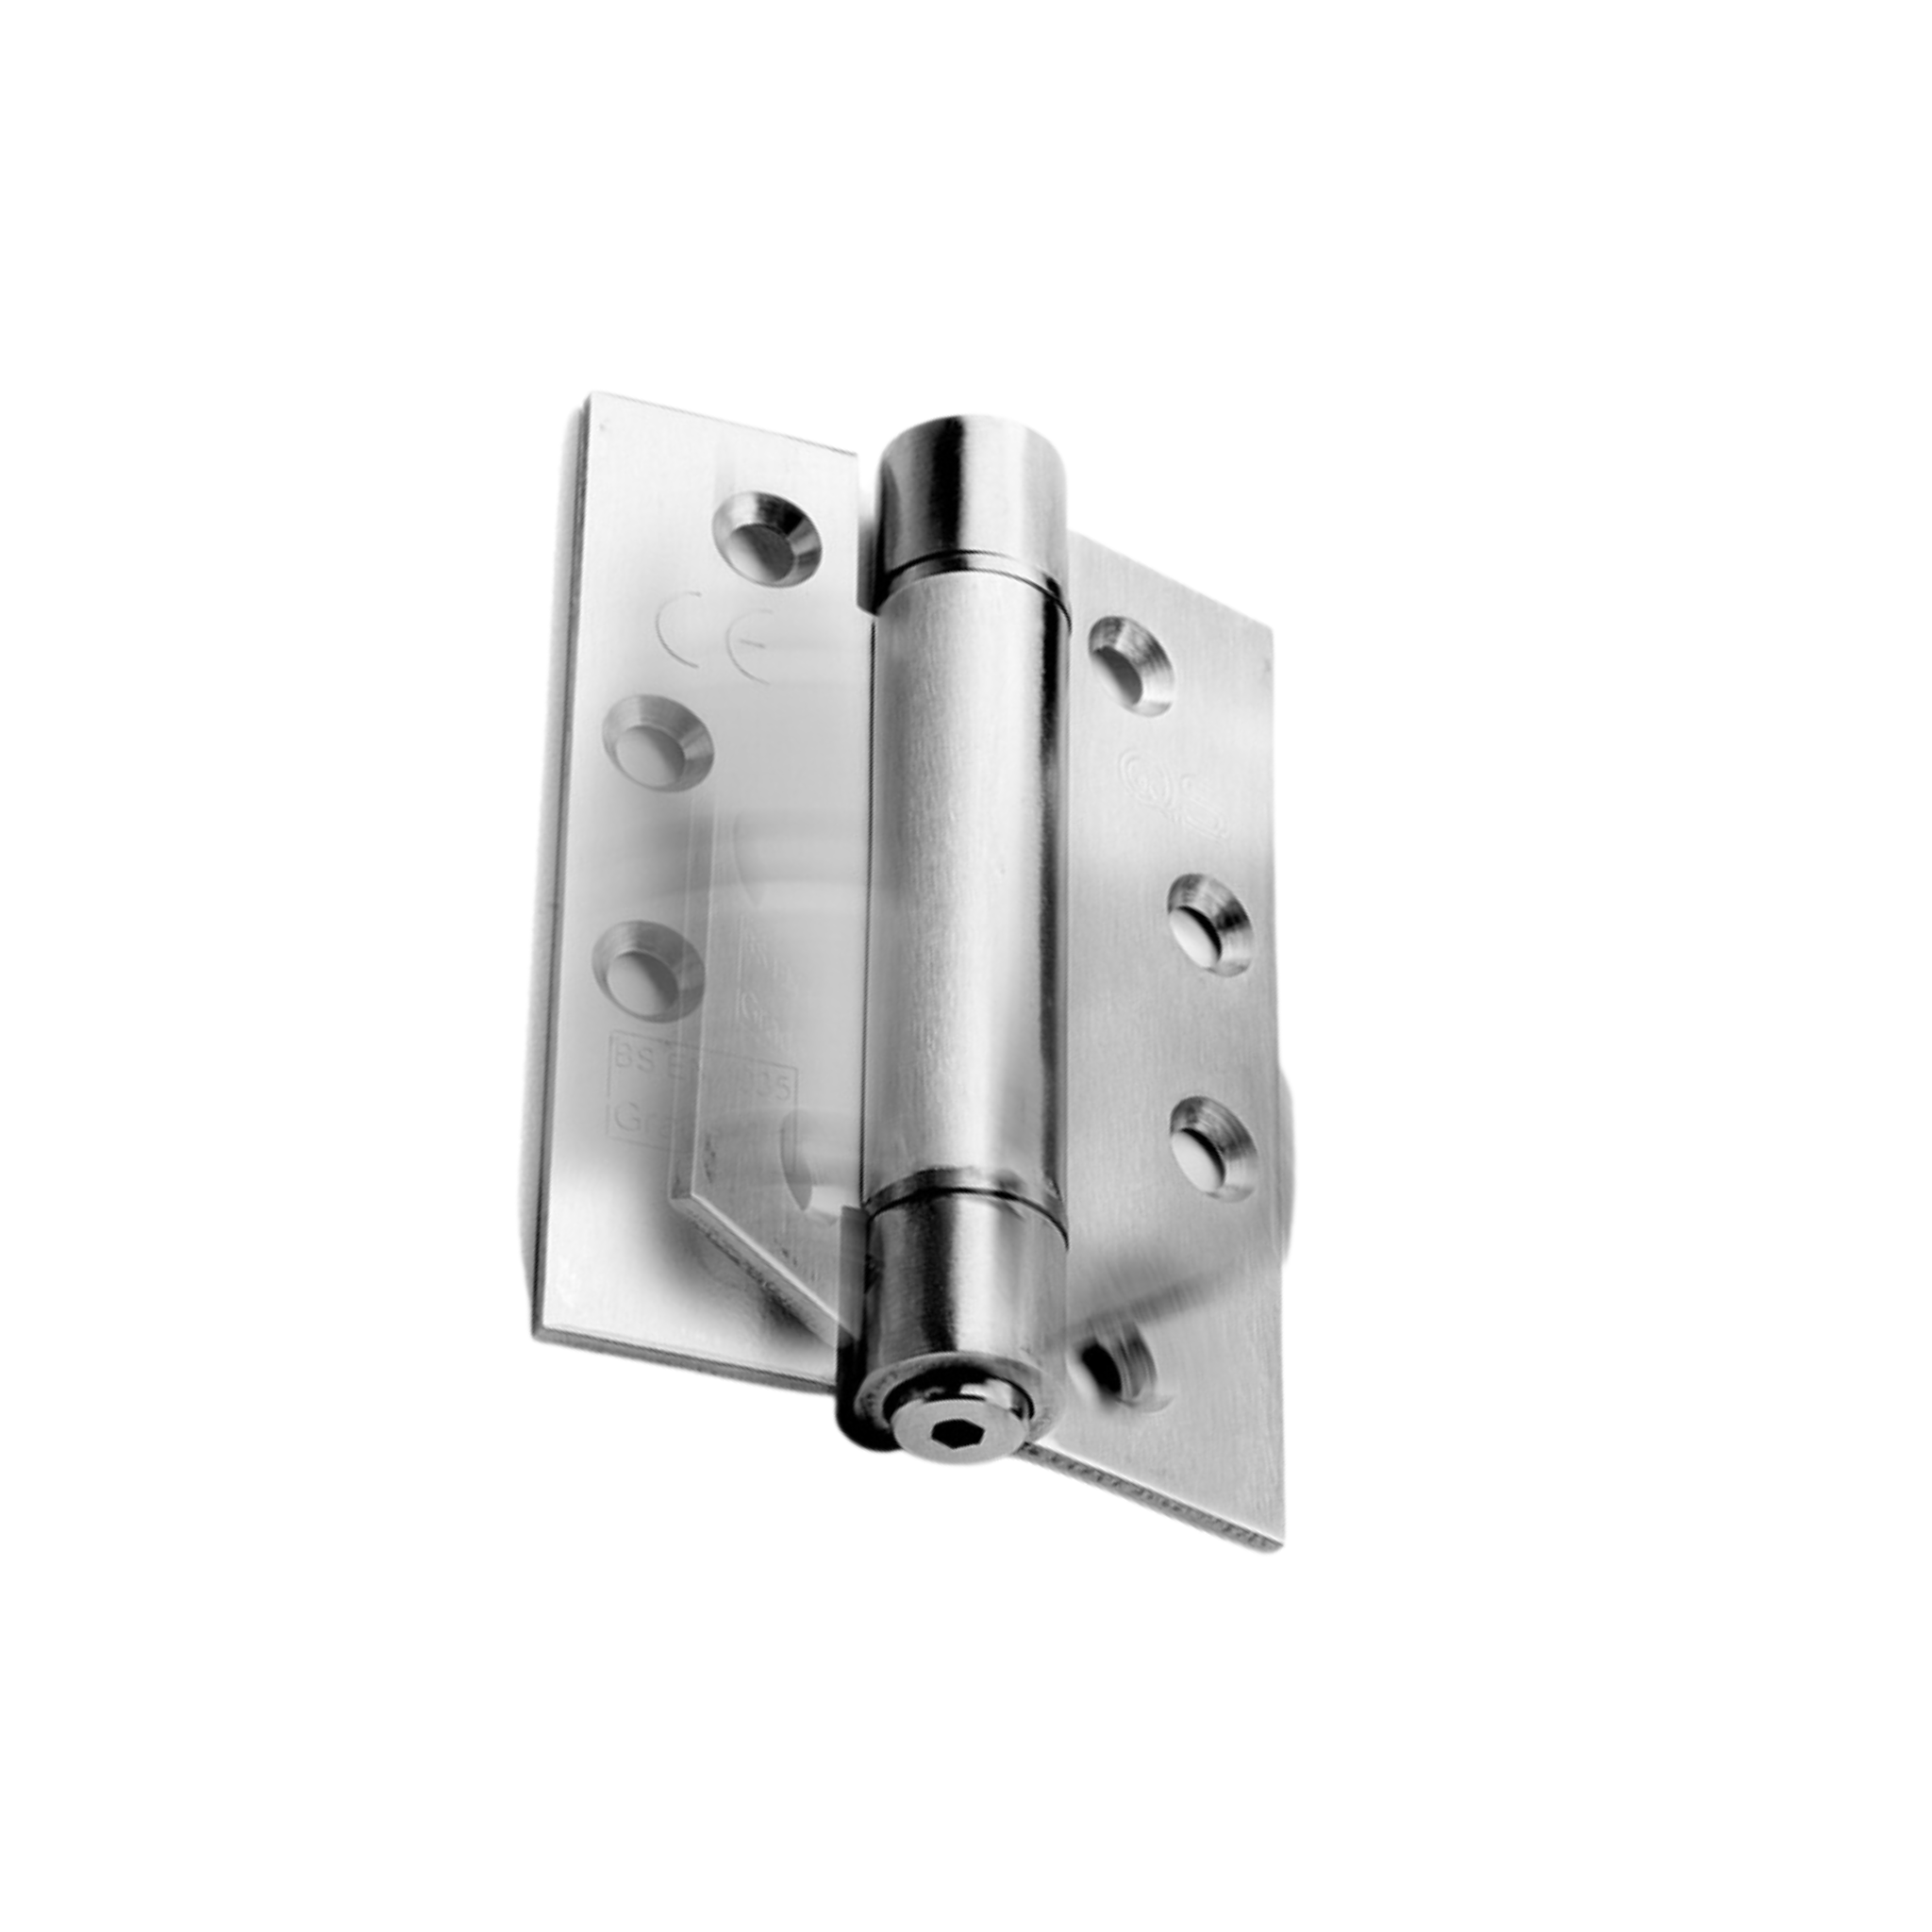 QS4439, Spring Hinge, Single Action, 2 x Hinges (1 Pair), Max Door Weight: 40kg, 100mm (h) x 76mm (w) x 3mm (t), Stainless Steel, QS